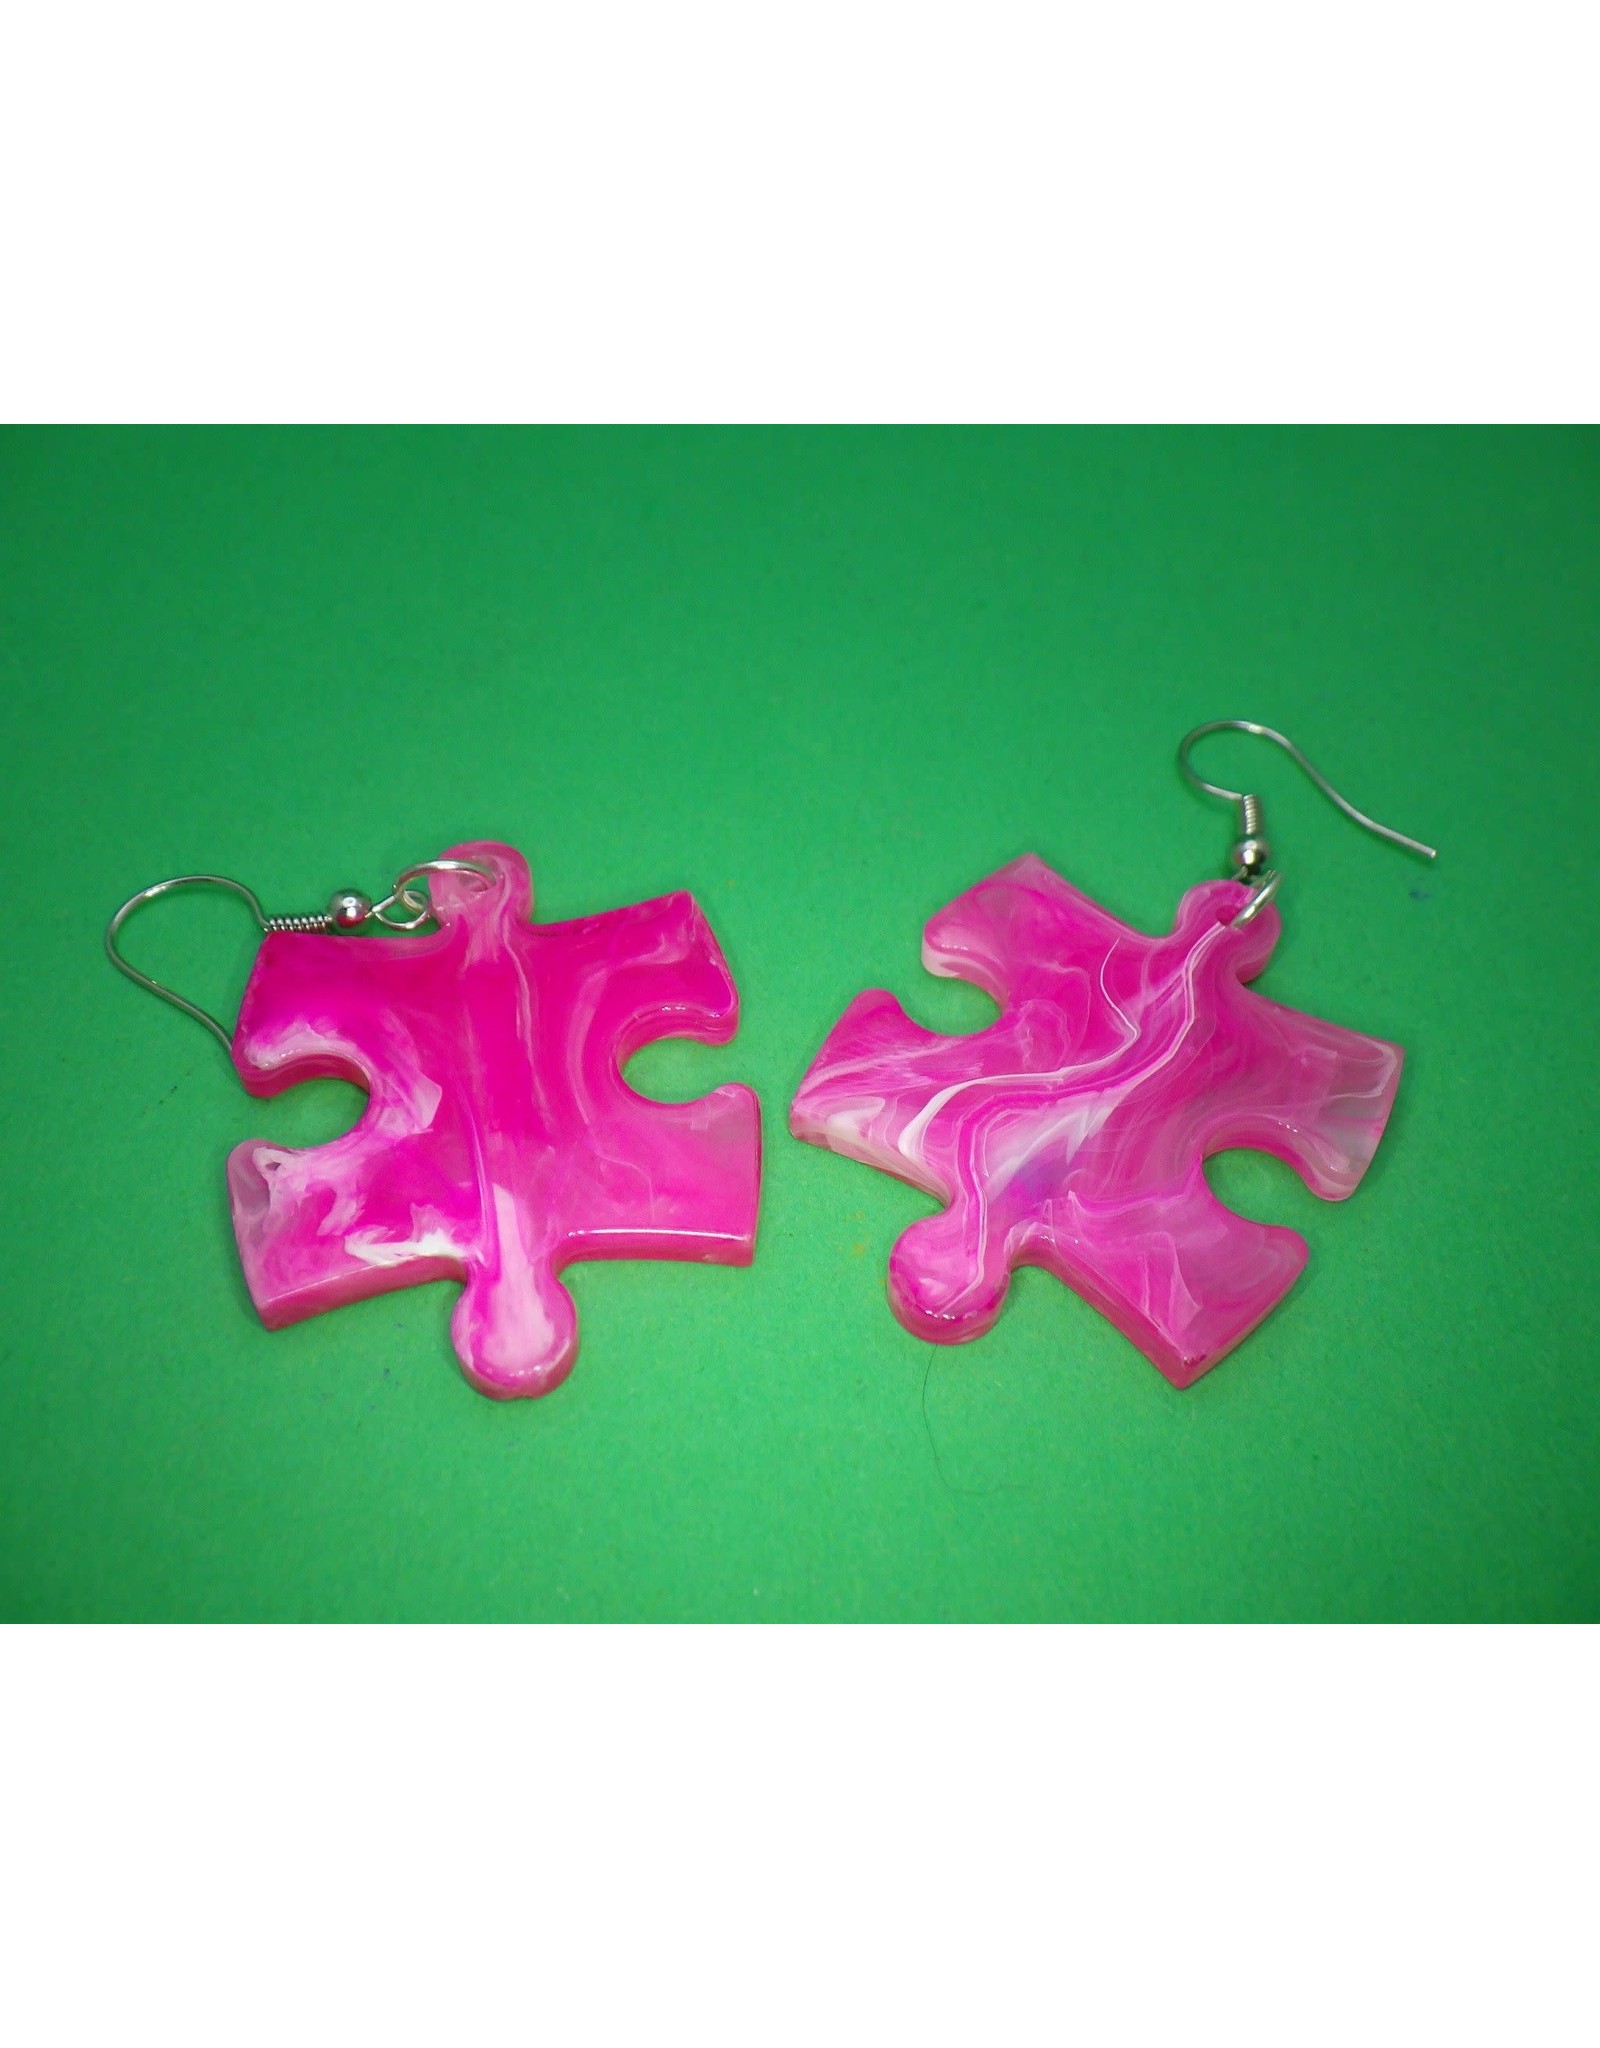 Chessex Earrings Borealis Puzzle Piece Pair (Assorted Dice Colors)